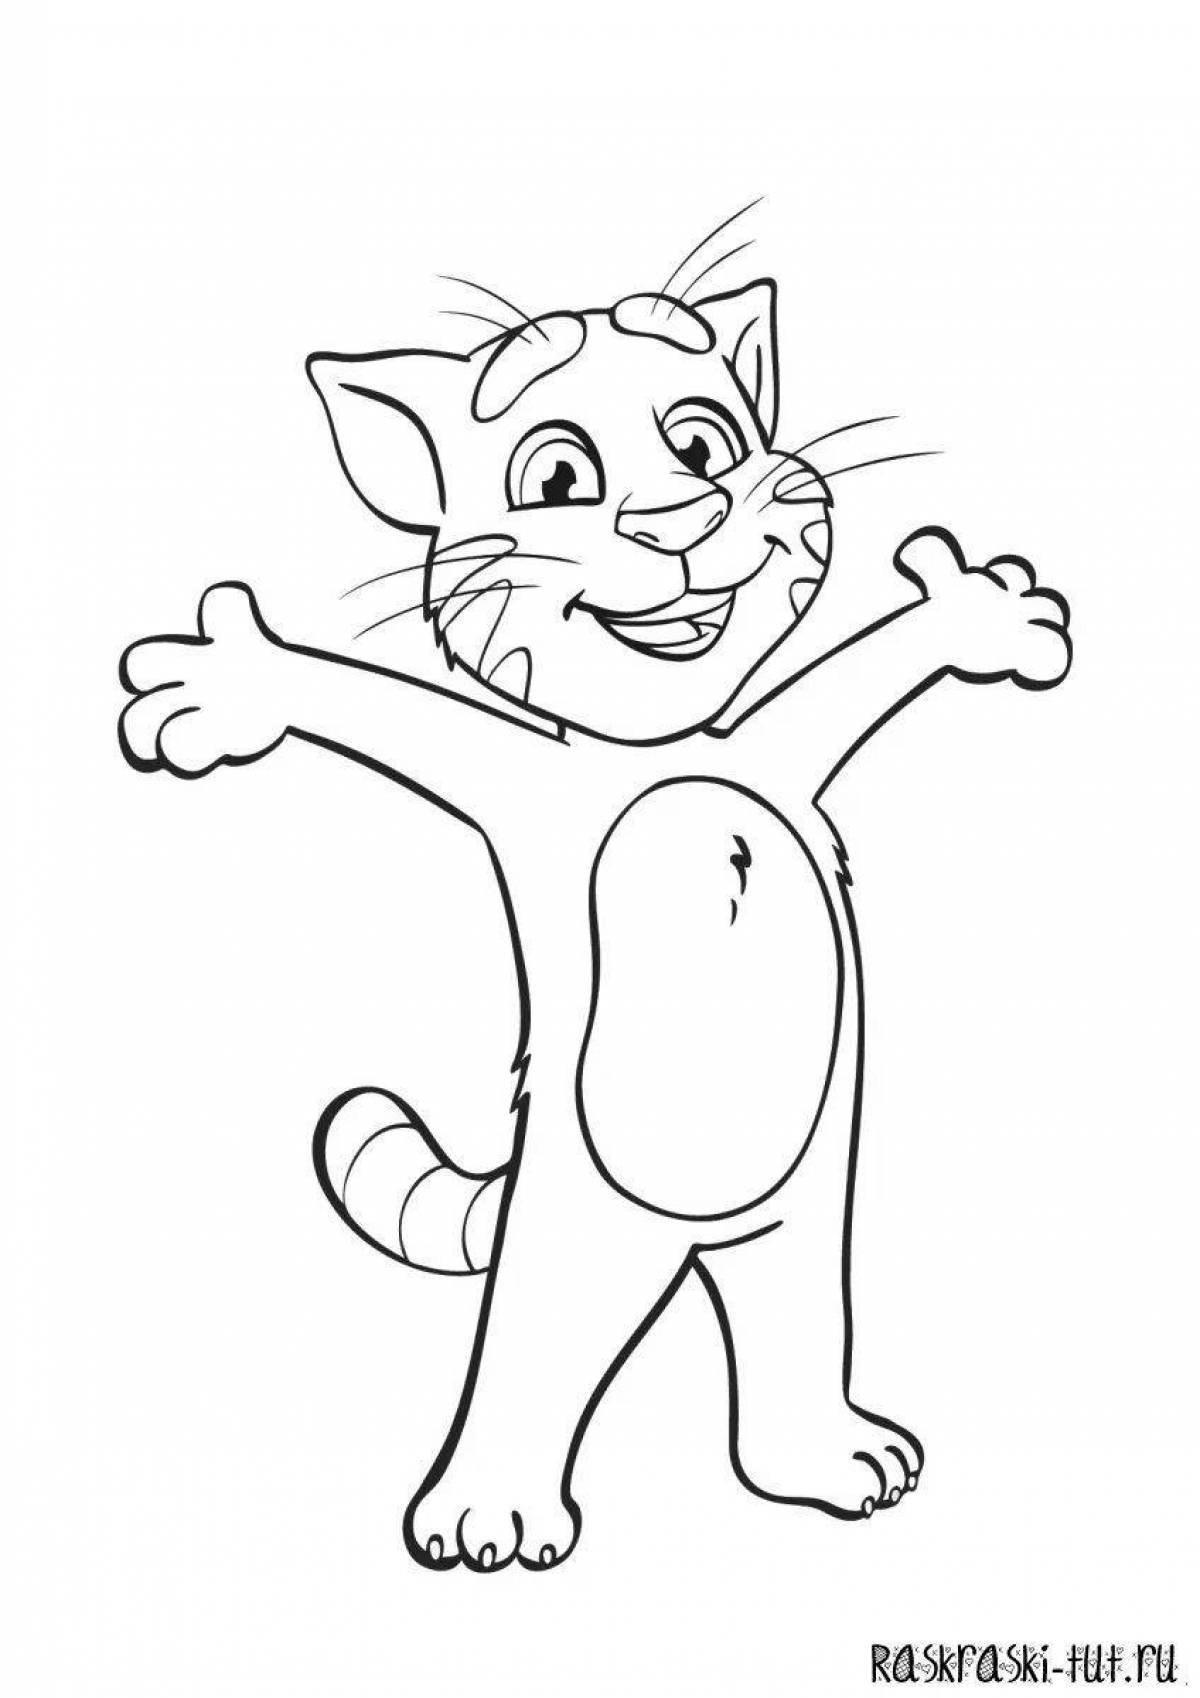 Lovely angela cat coloring page